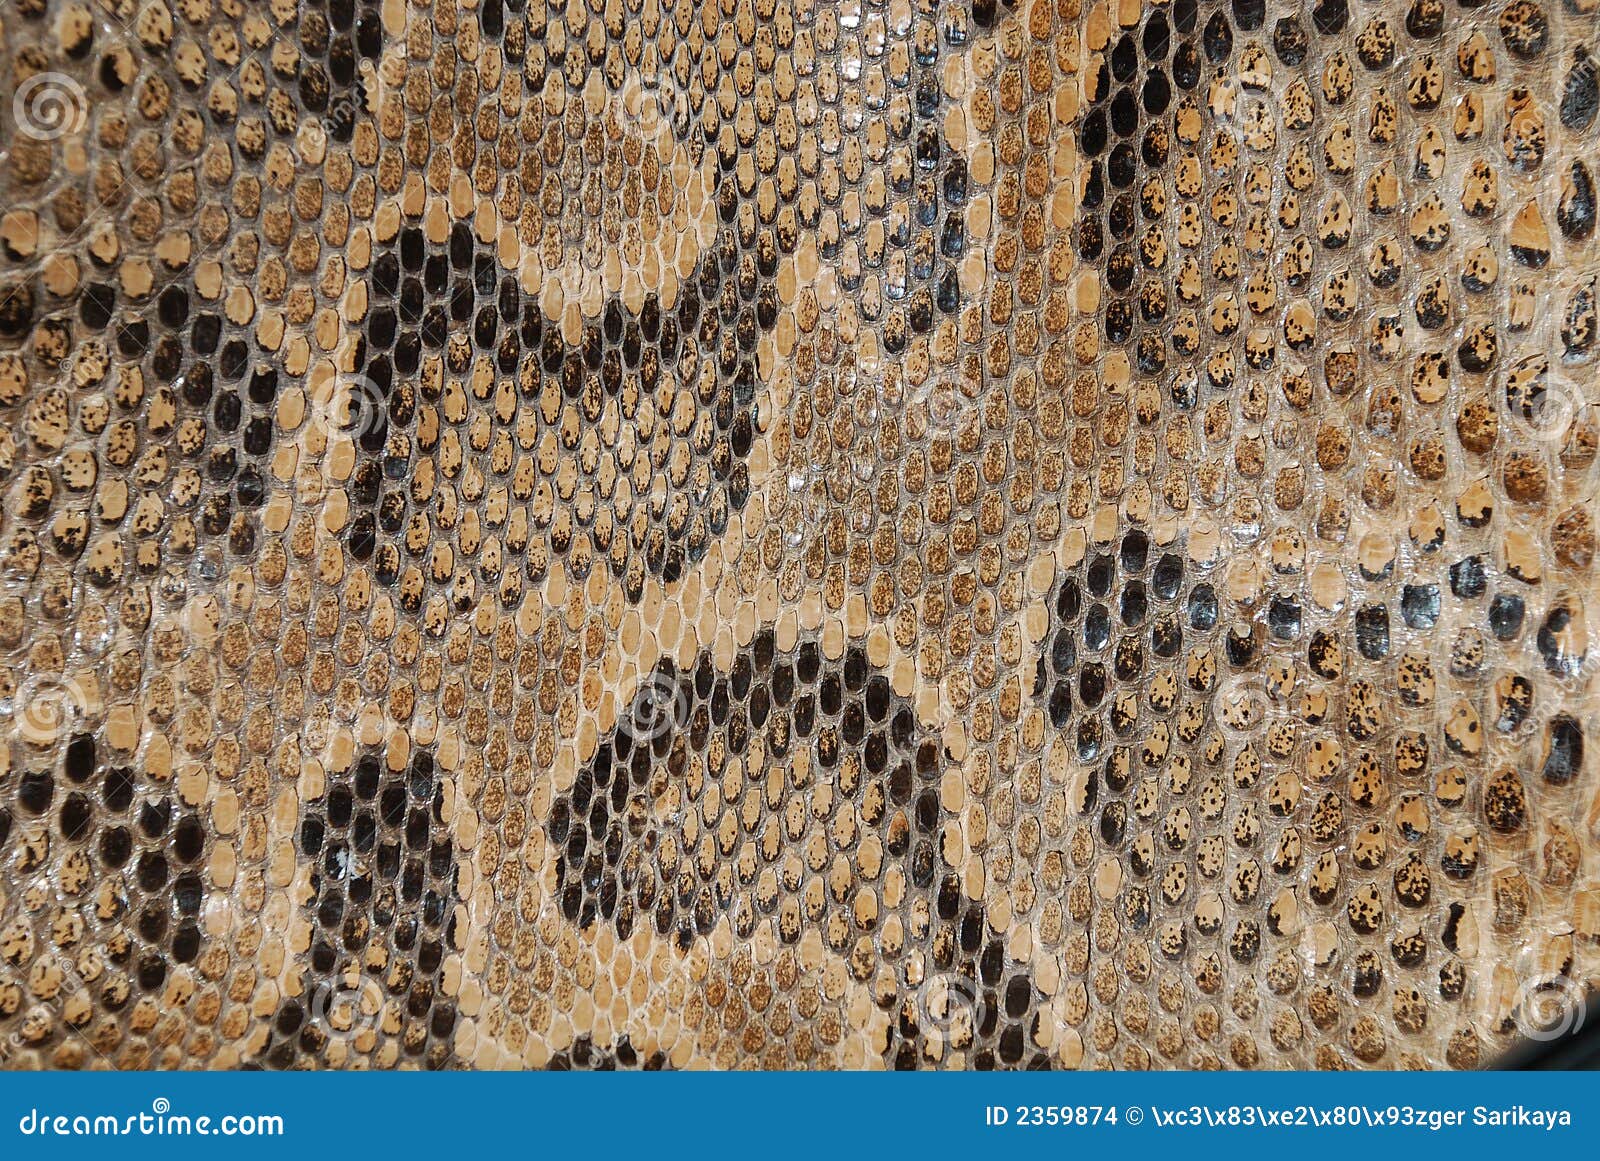 Snake Texture Stock Images - Image: 2359874